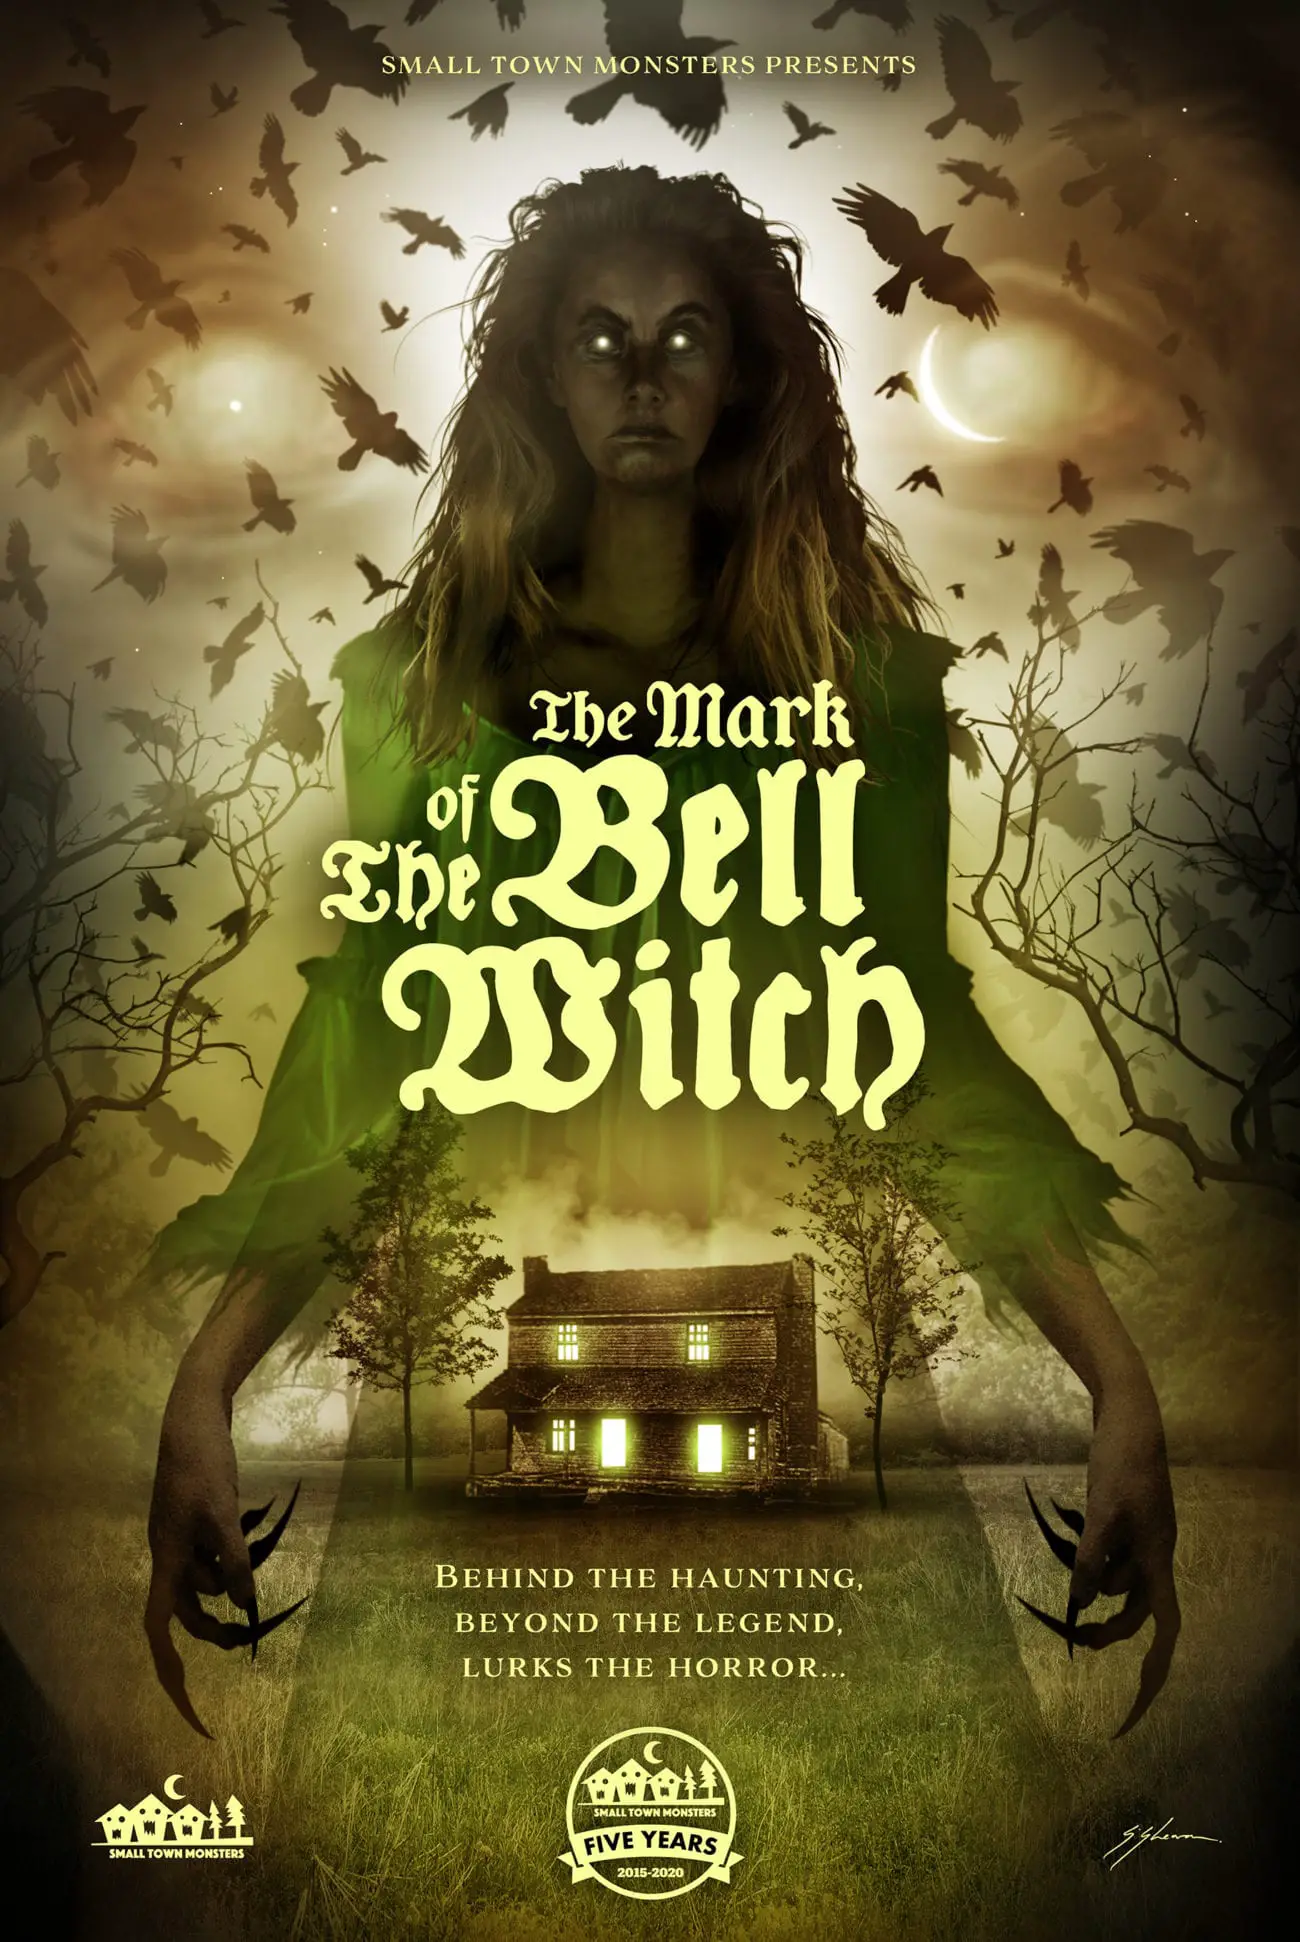 Poster for the film showing the witch, the and a house in the background and many crows flying in the sky